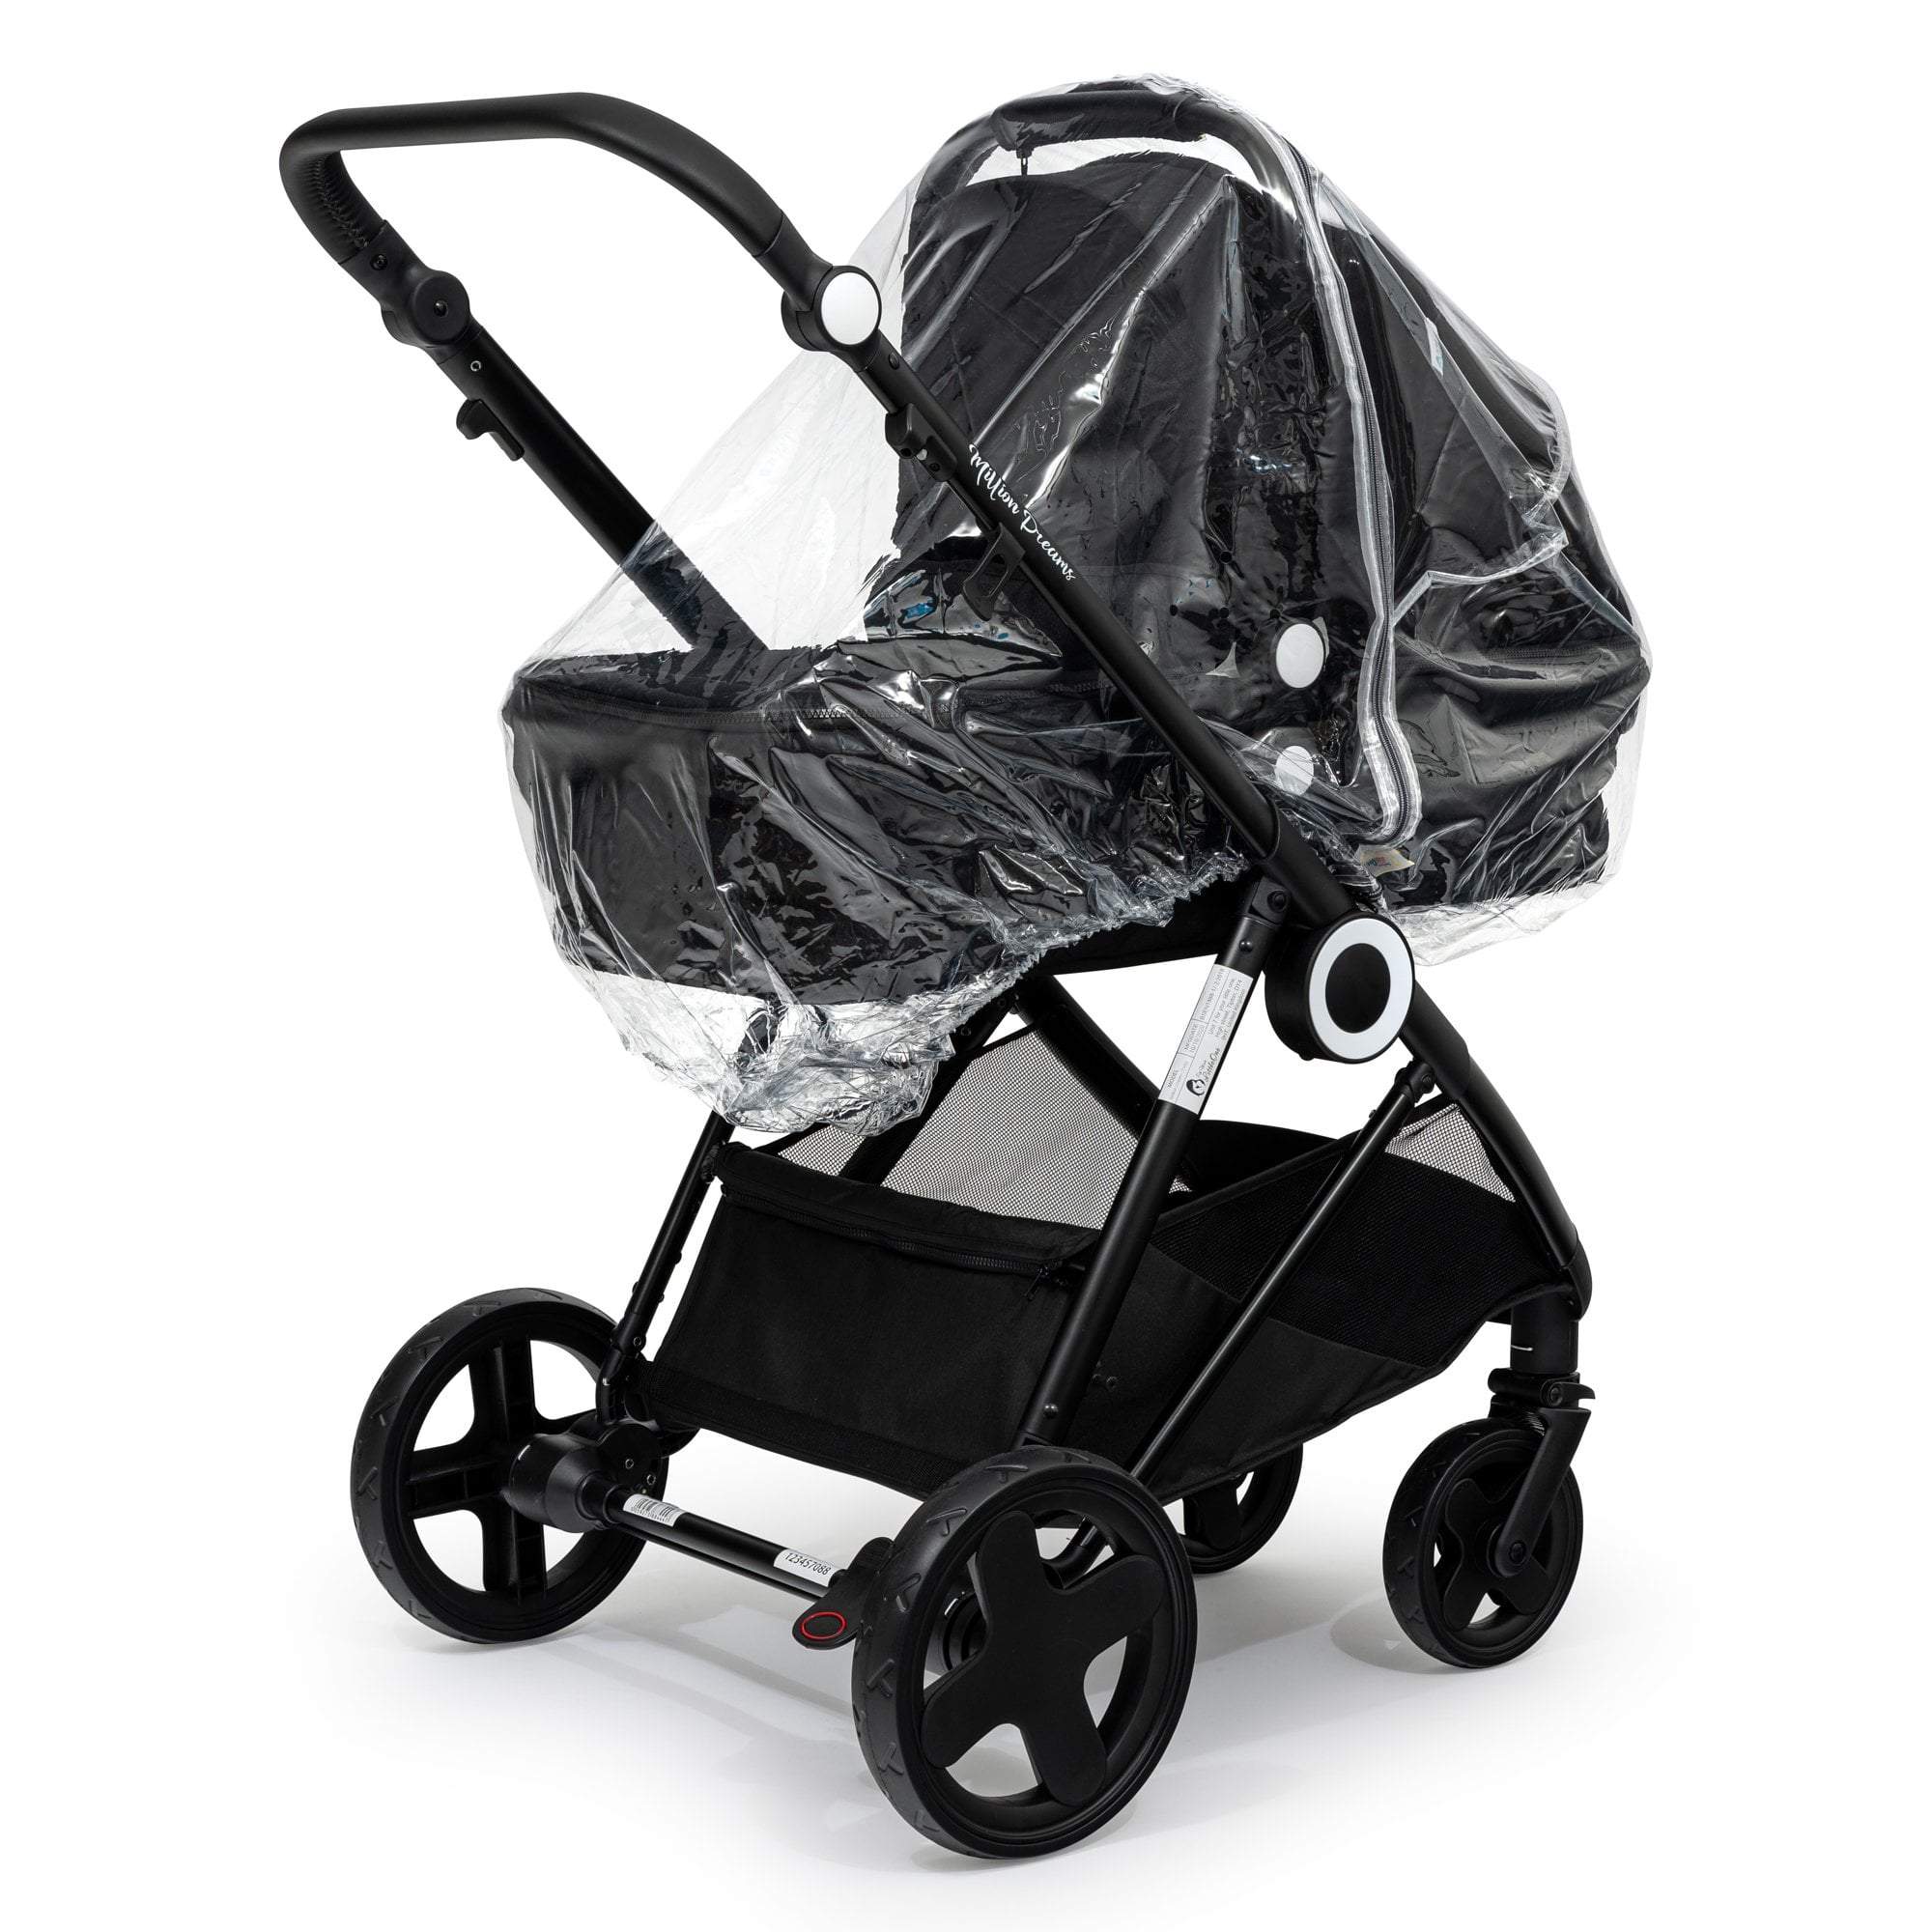 Carrycot Raincover Compatible With Inglesina - Fits All Models - For Your Little One